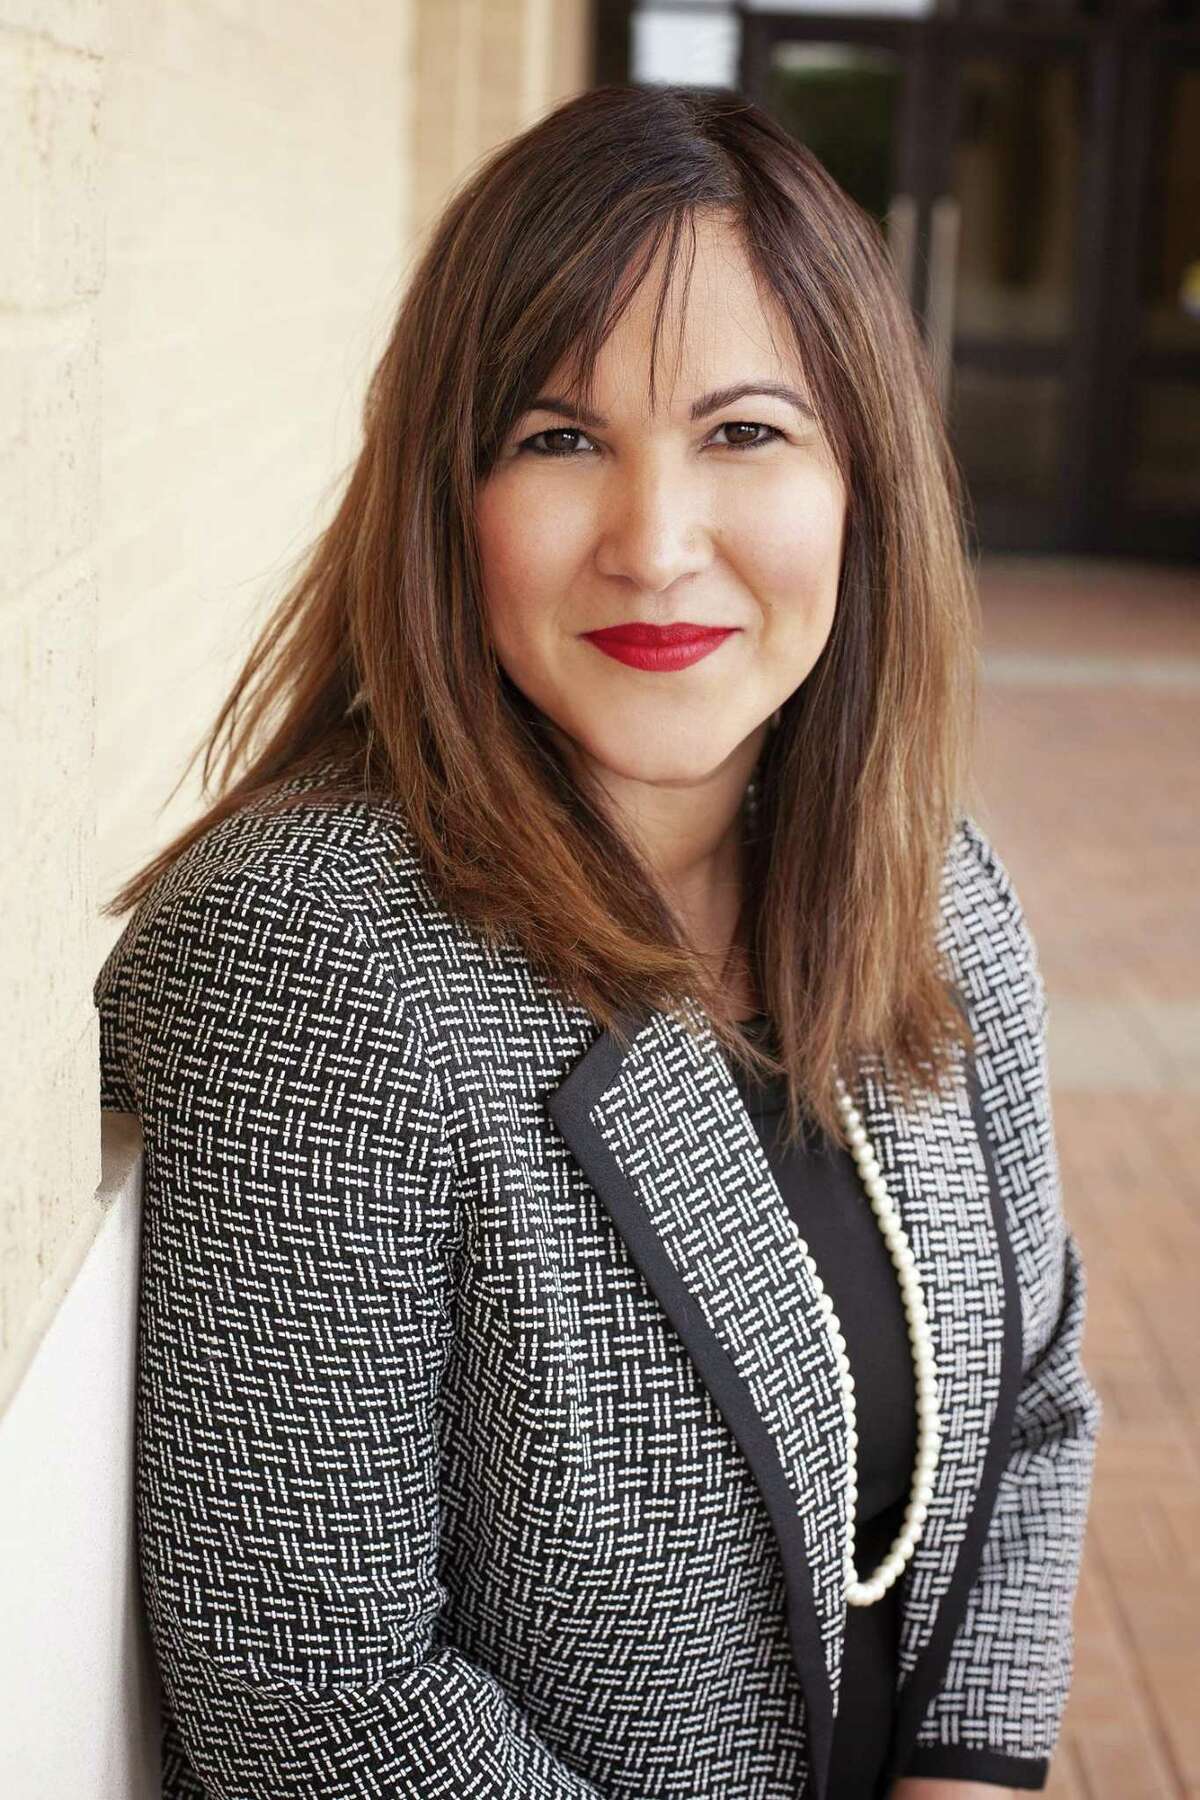 Arlene Serrano is running for the Place 1 seat on the Alamo Heights ISD board in the May 4 election.